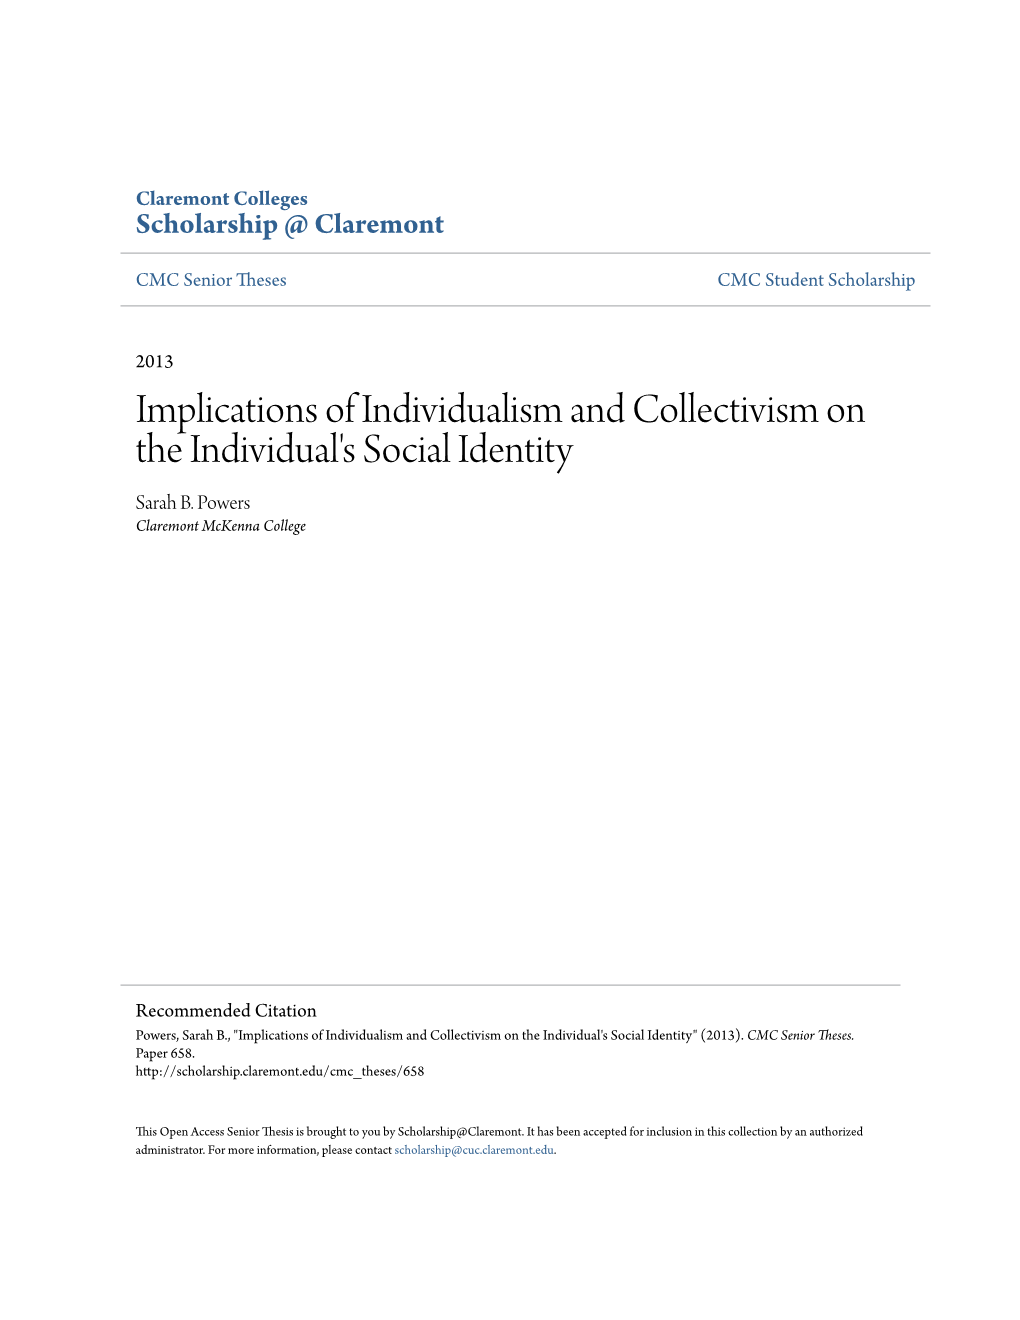 Implications of Individualism and Collectivism on the Individual's Social Identity Sarah B